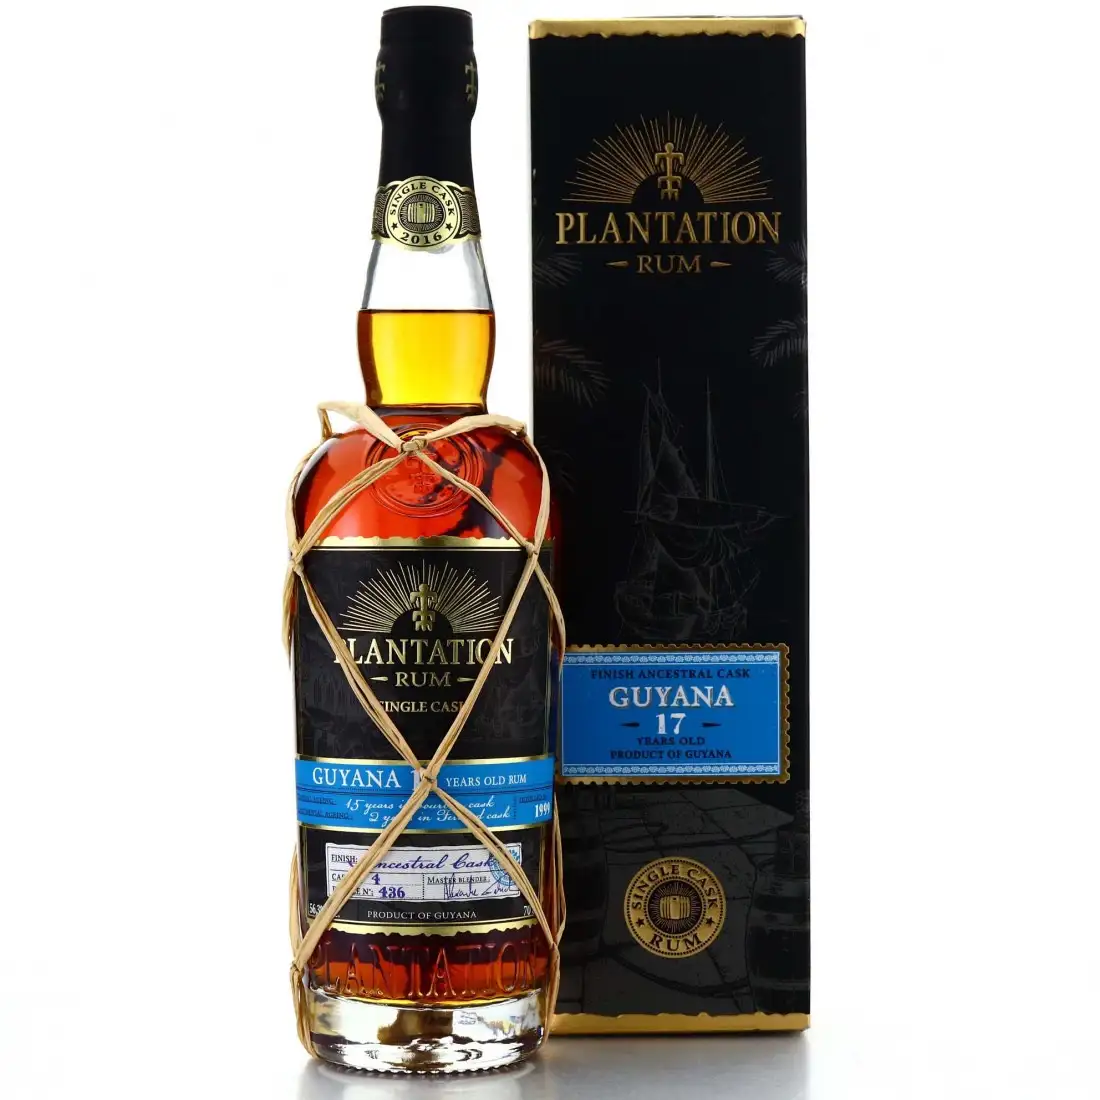 Image of the front of the bottle of the rum Plantation Guyana